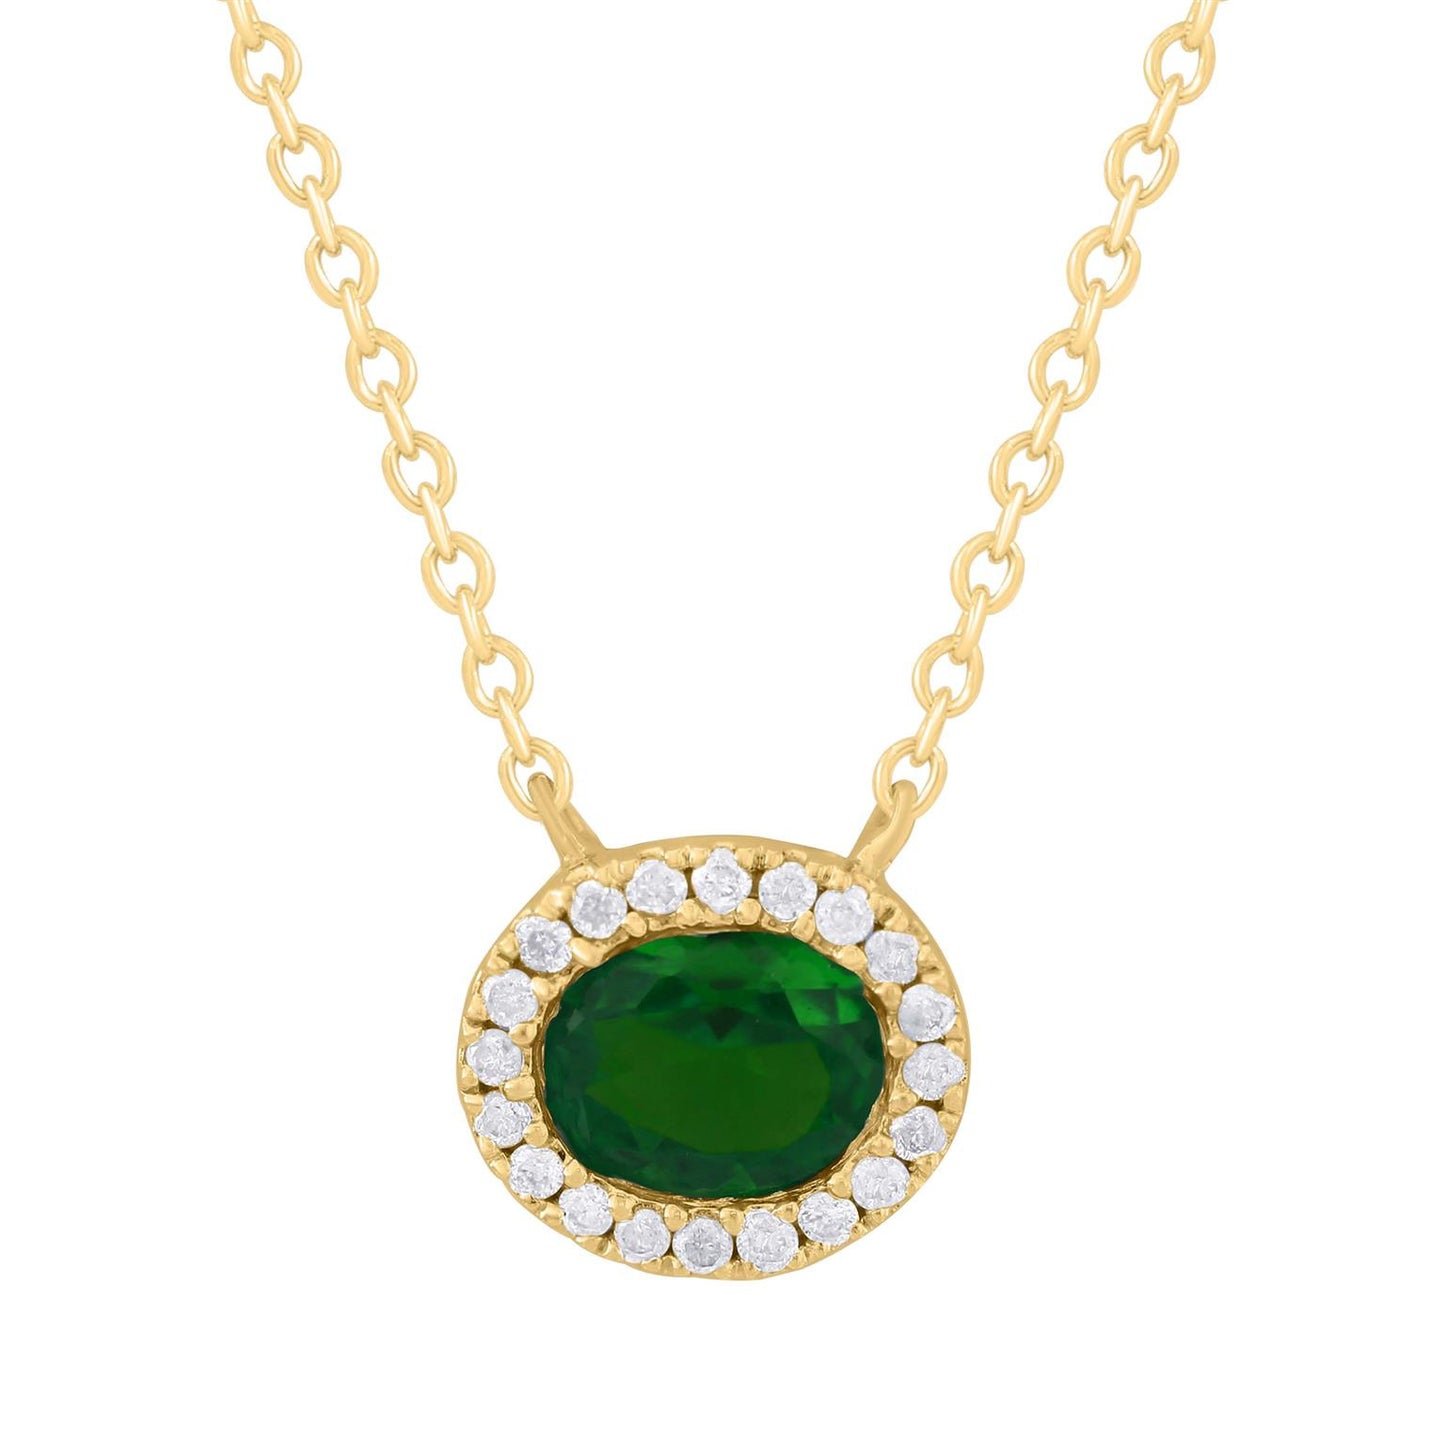 Oval Diamond Pendant with Color Stone in the Middle